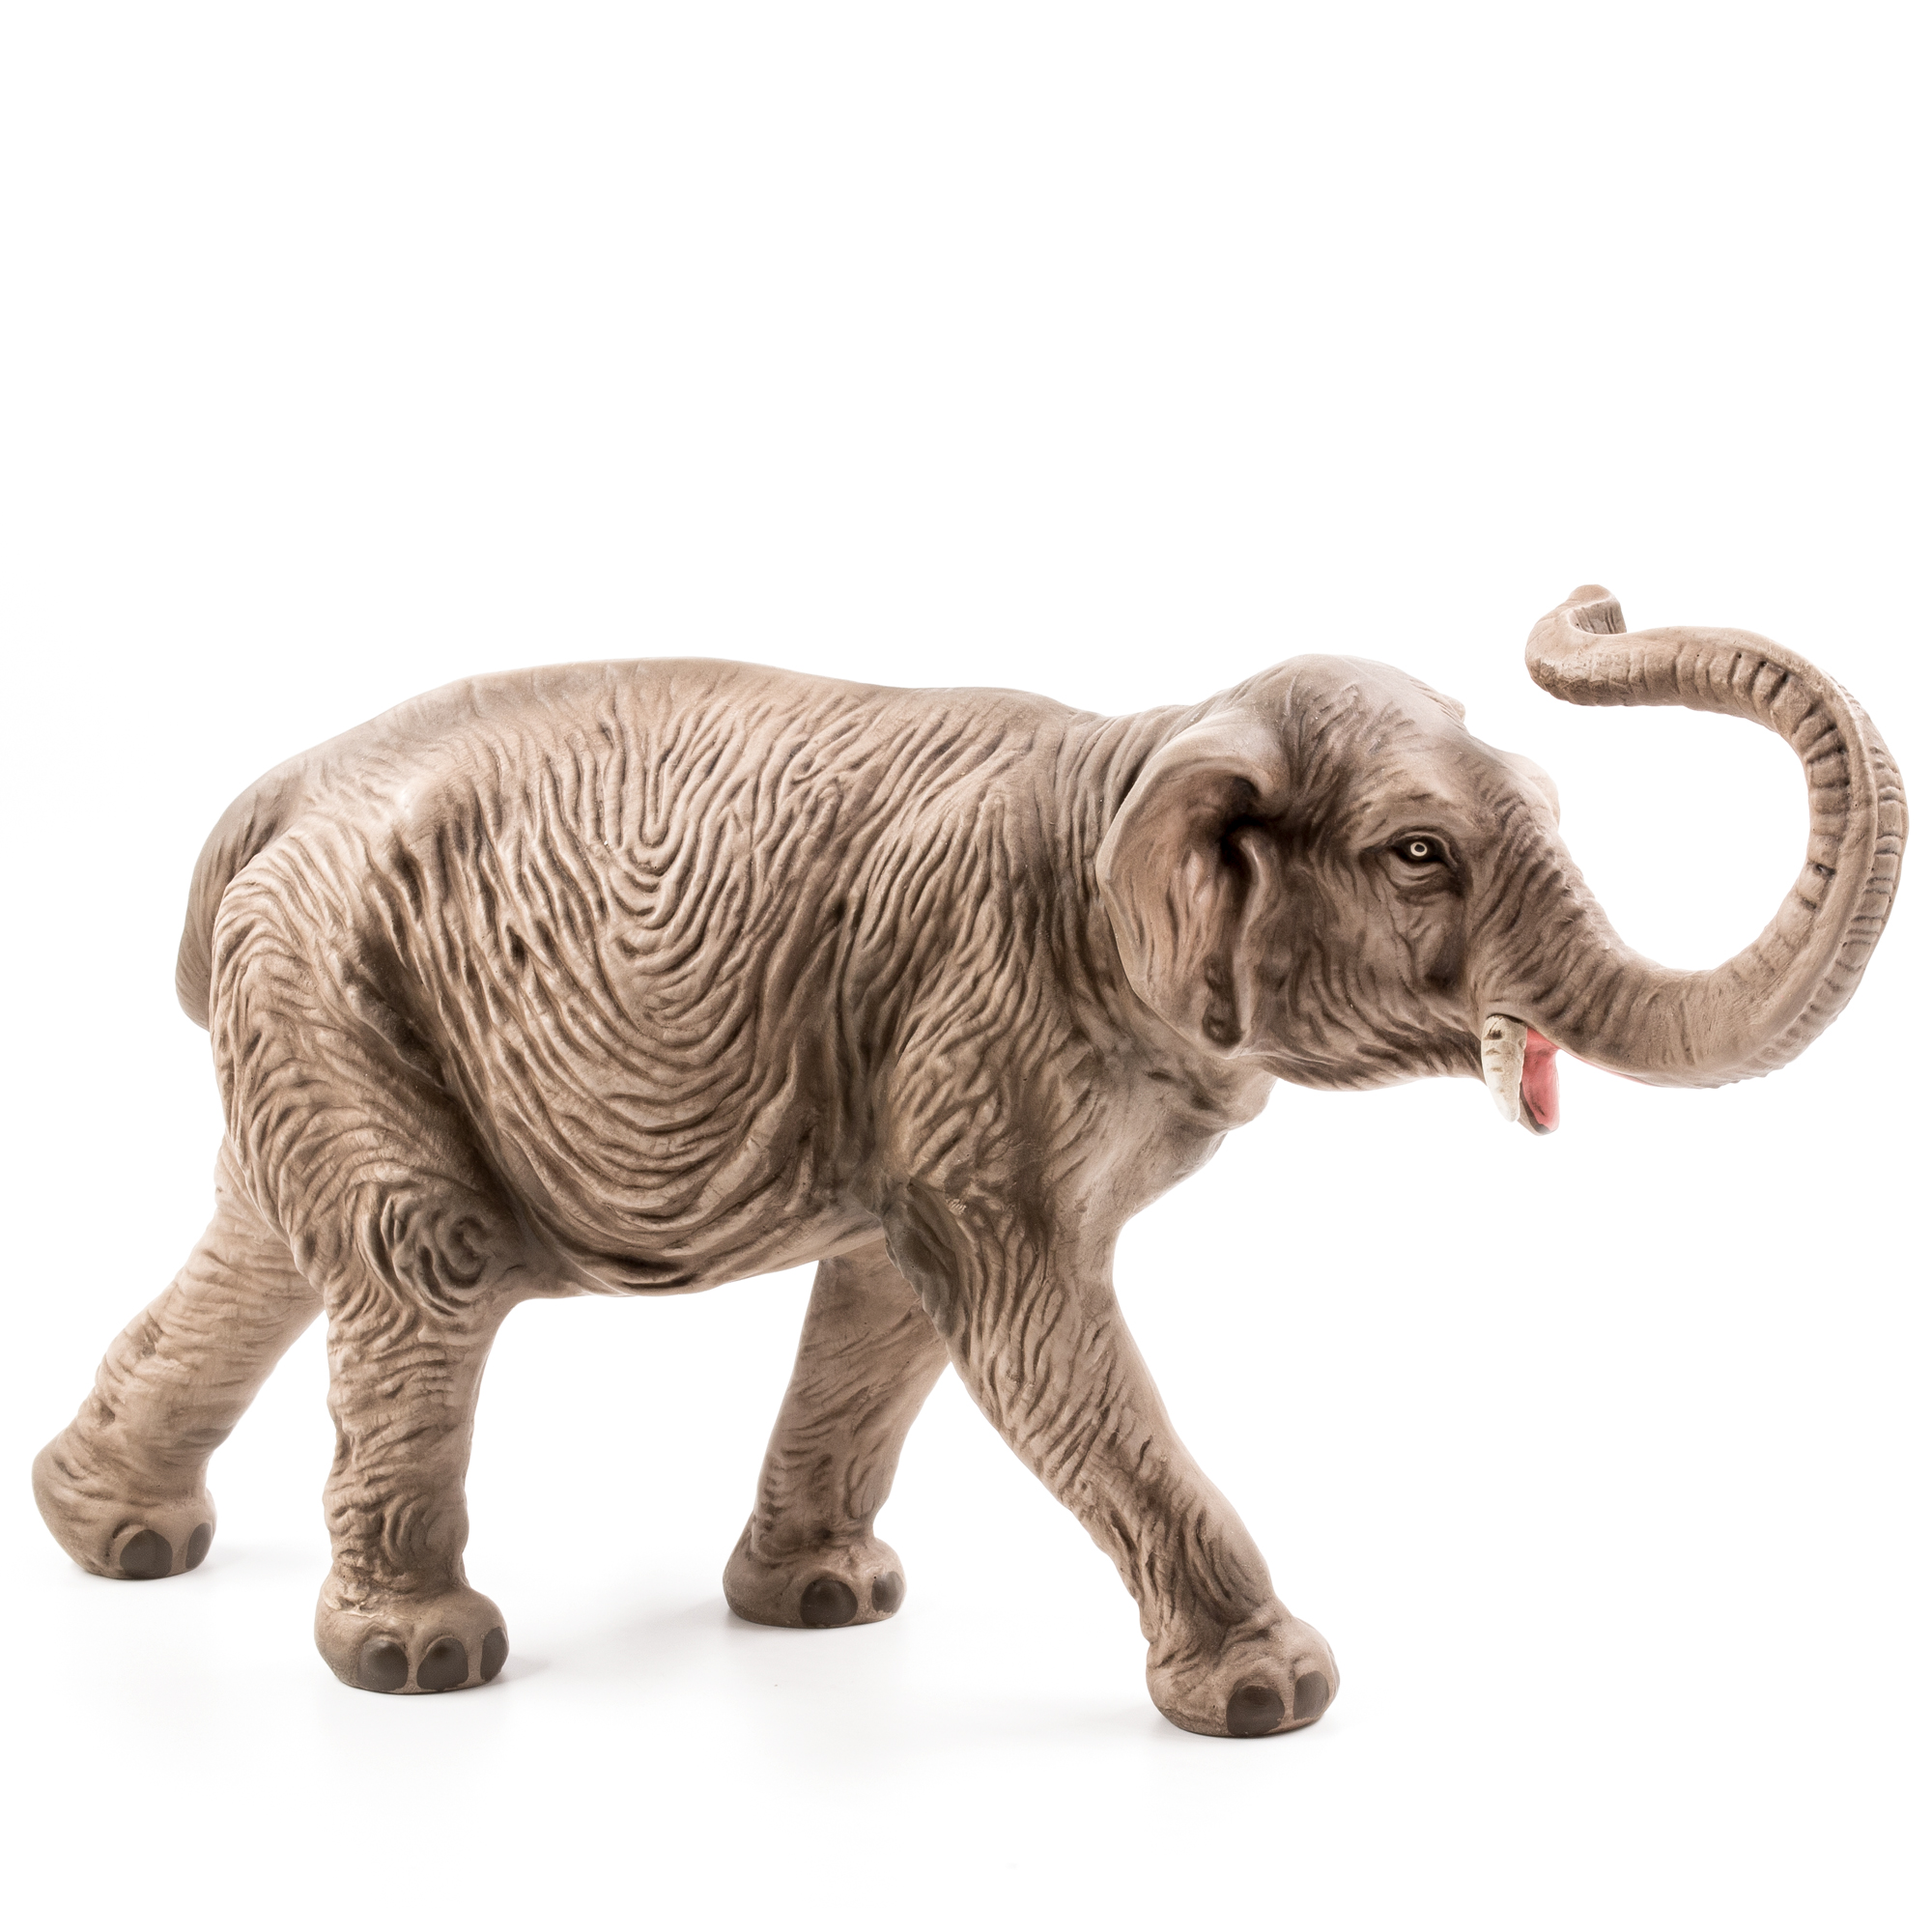 Elephant with uplifted trunk, to 8.5 in. figures